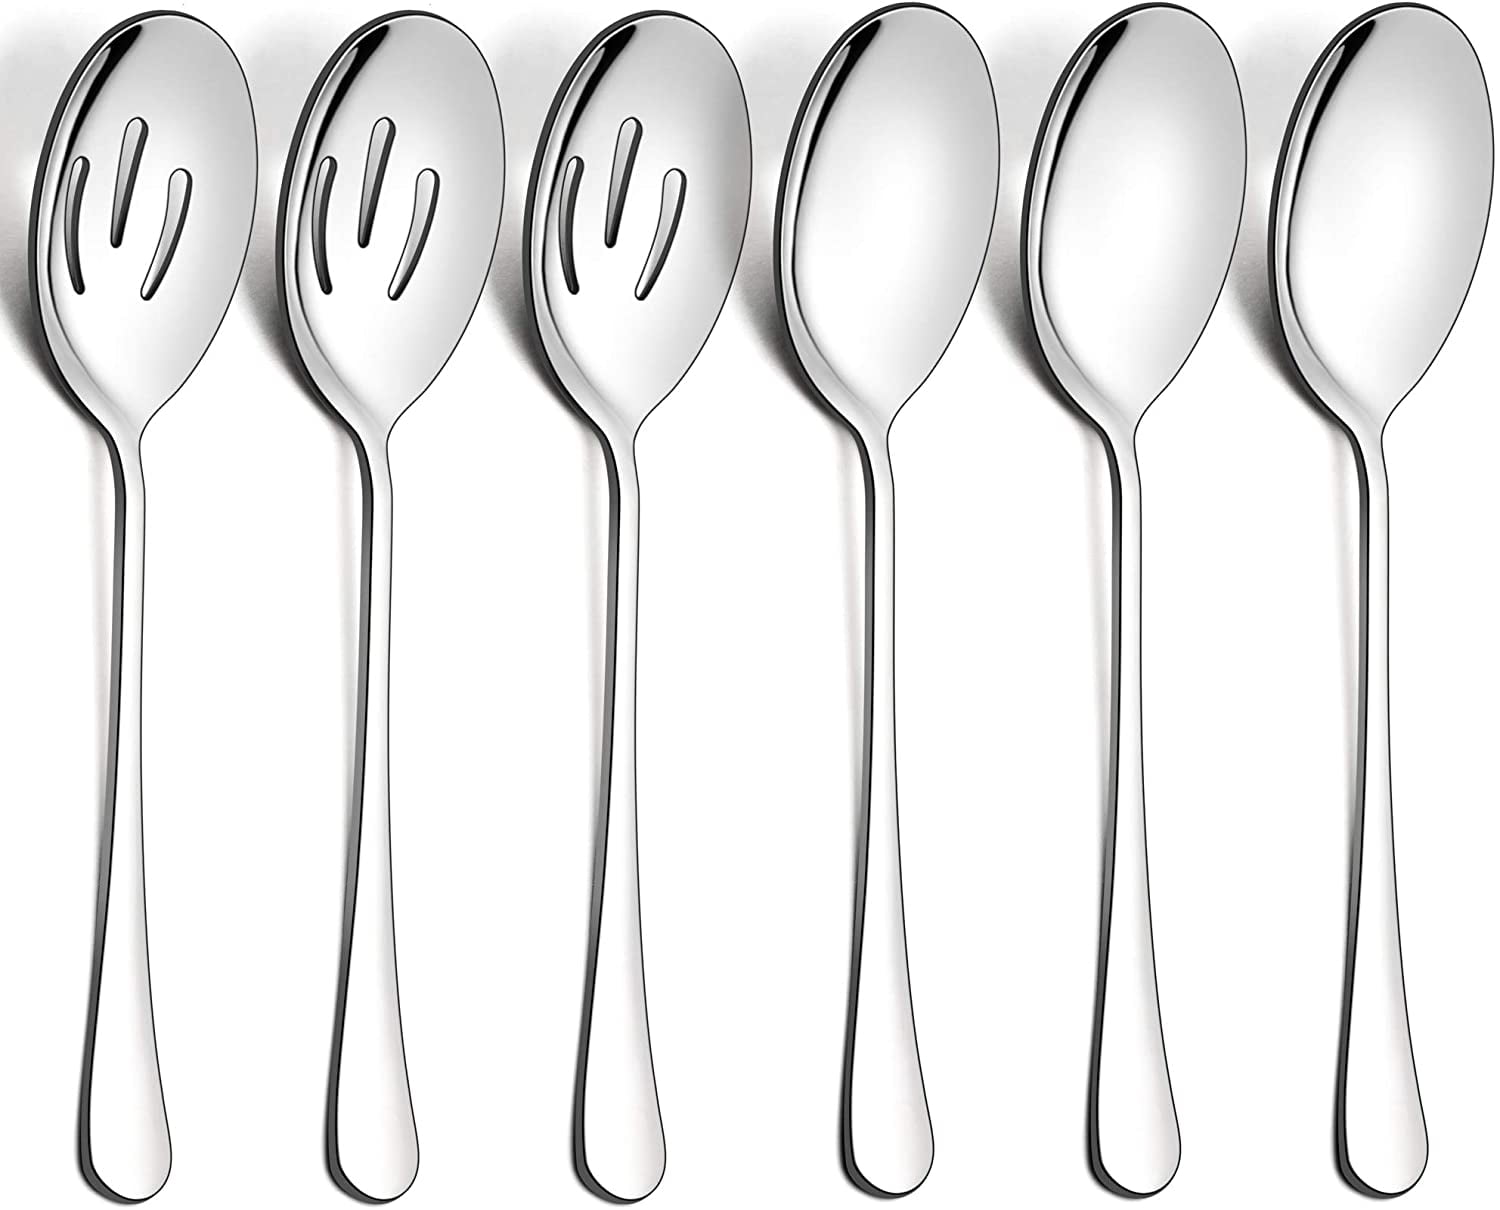 9.8 Inch Stainless Steel Buffet Catering Serving Spoons Forks Set 3 Black Serving Tongs 3 Black Slotted Serving Spoons LIANYU 3 Large Black Serving Spoons Dishwasher Safe 3 Black Serving Forks 